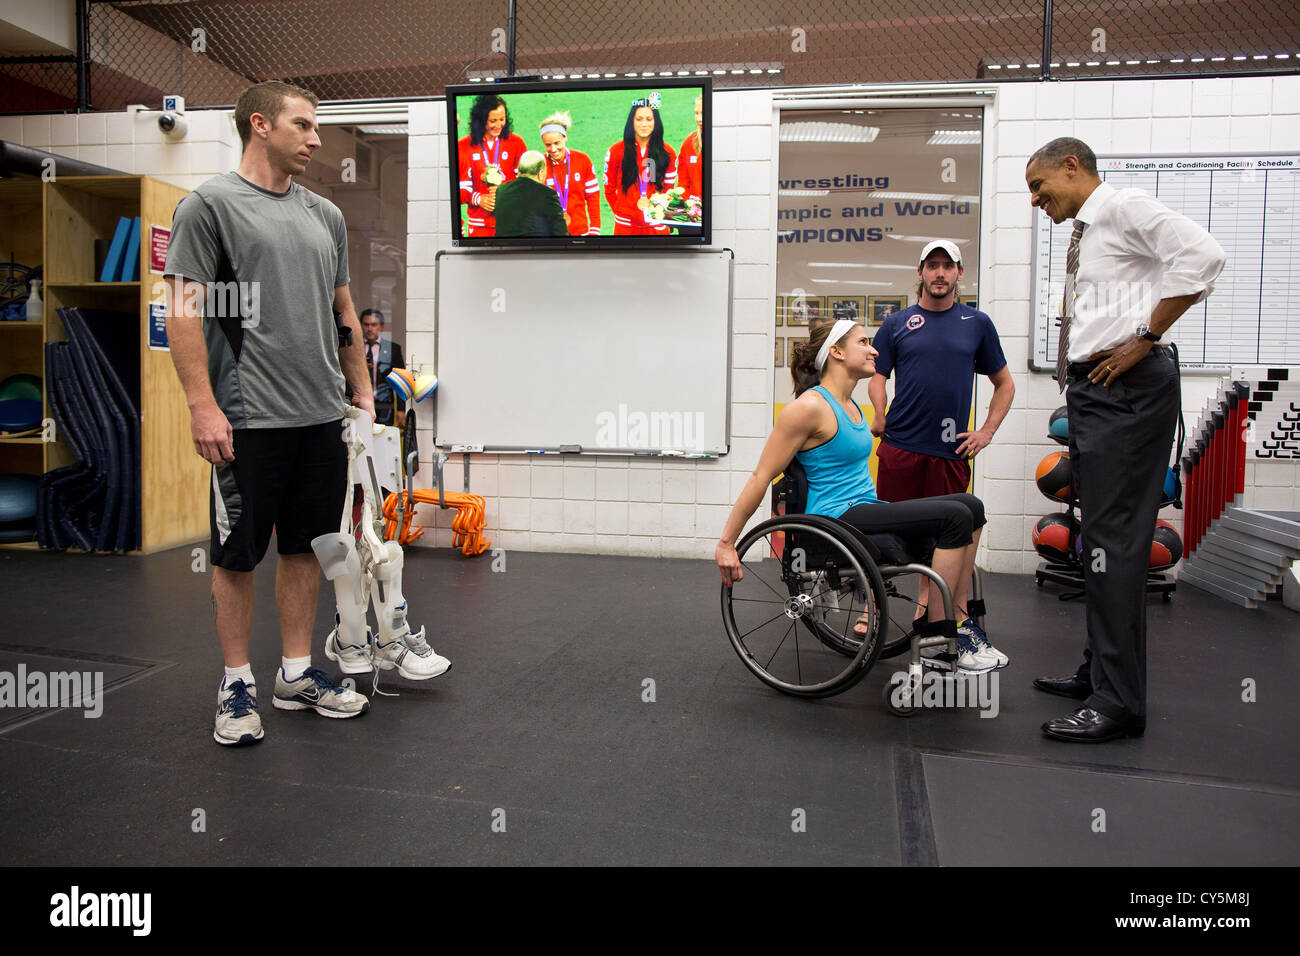 US President Barack Obama talks with paralympic athletes at the US Olympic Training Facility August 9, 2012 in Colorado Springs, Colorado. Broadcast of the gold medal ceremony for the US Olympic women's soccer team plays on the TV in the background. Stock Photo